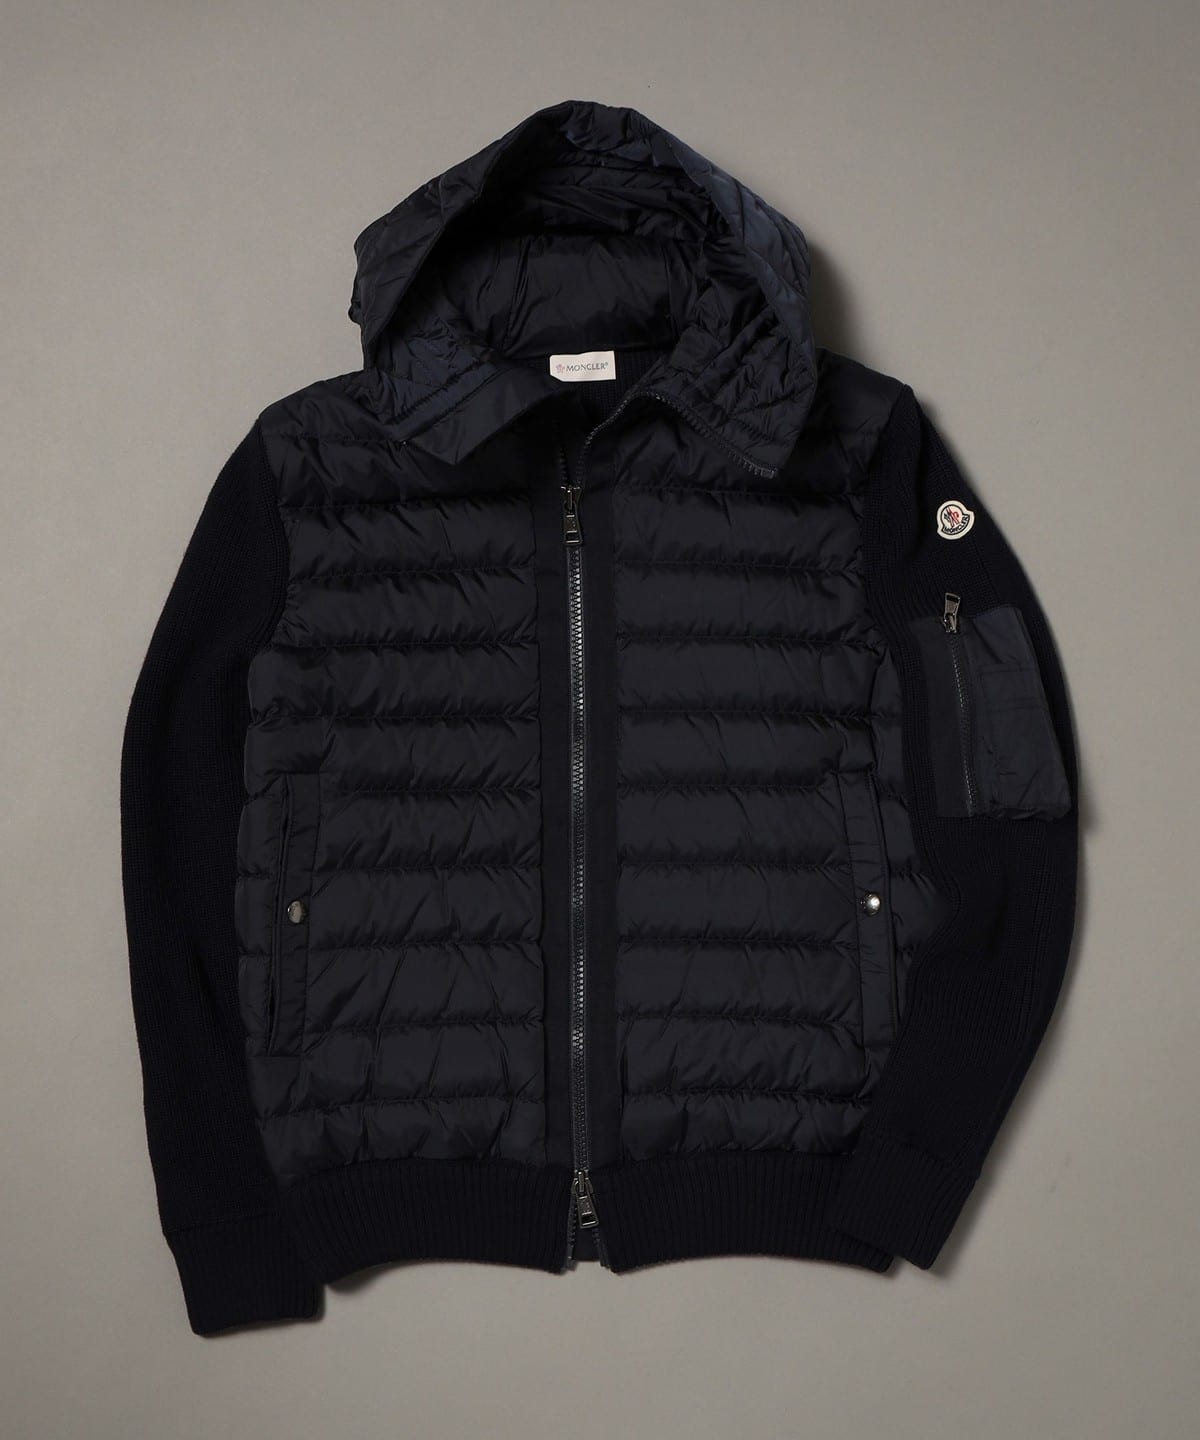 MONCLER/MAGLIONE ニット×ナイロン ダウンパーカー | eclipseseal.com